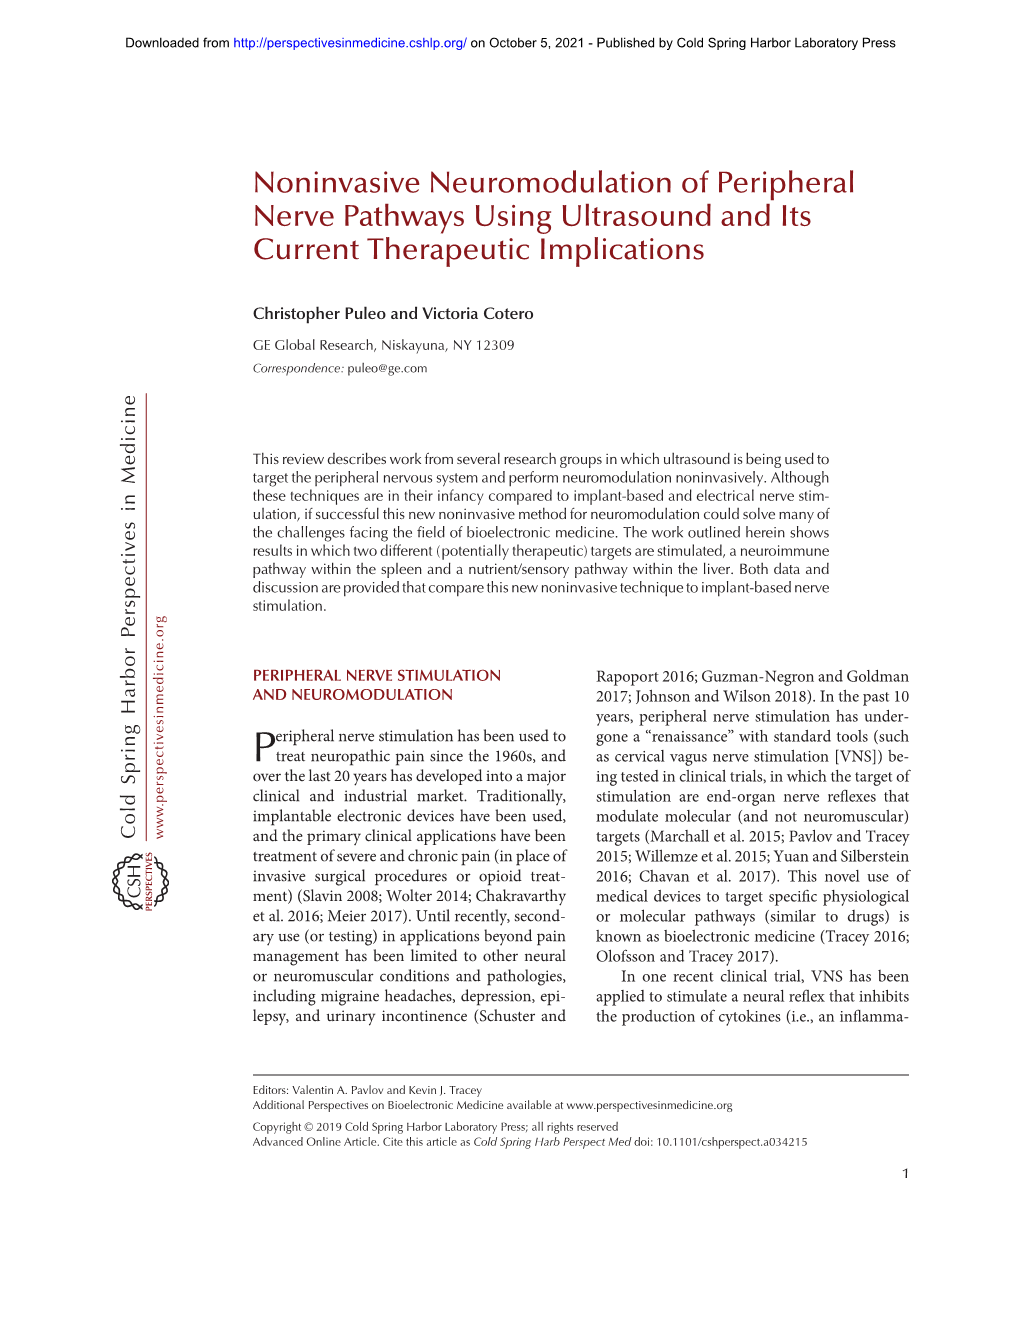 Noninvasive Neuromodulation of Peripheral Nerve Pathways Using Ultrasound and Its Current Therapeutic Implications